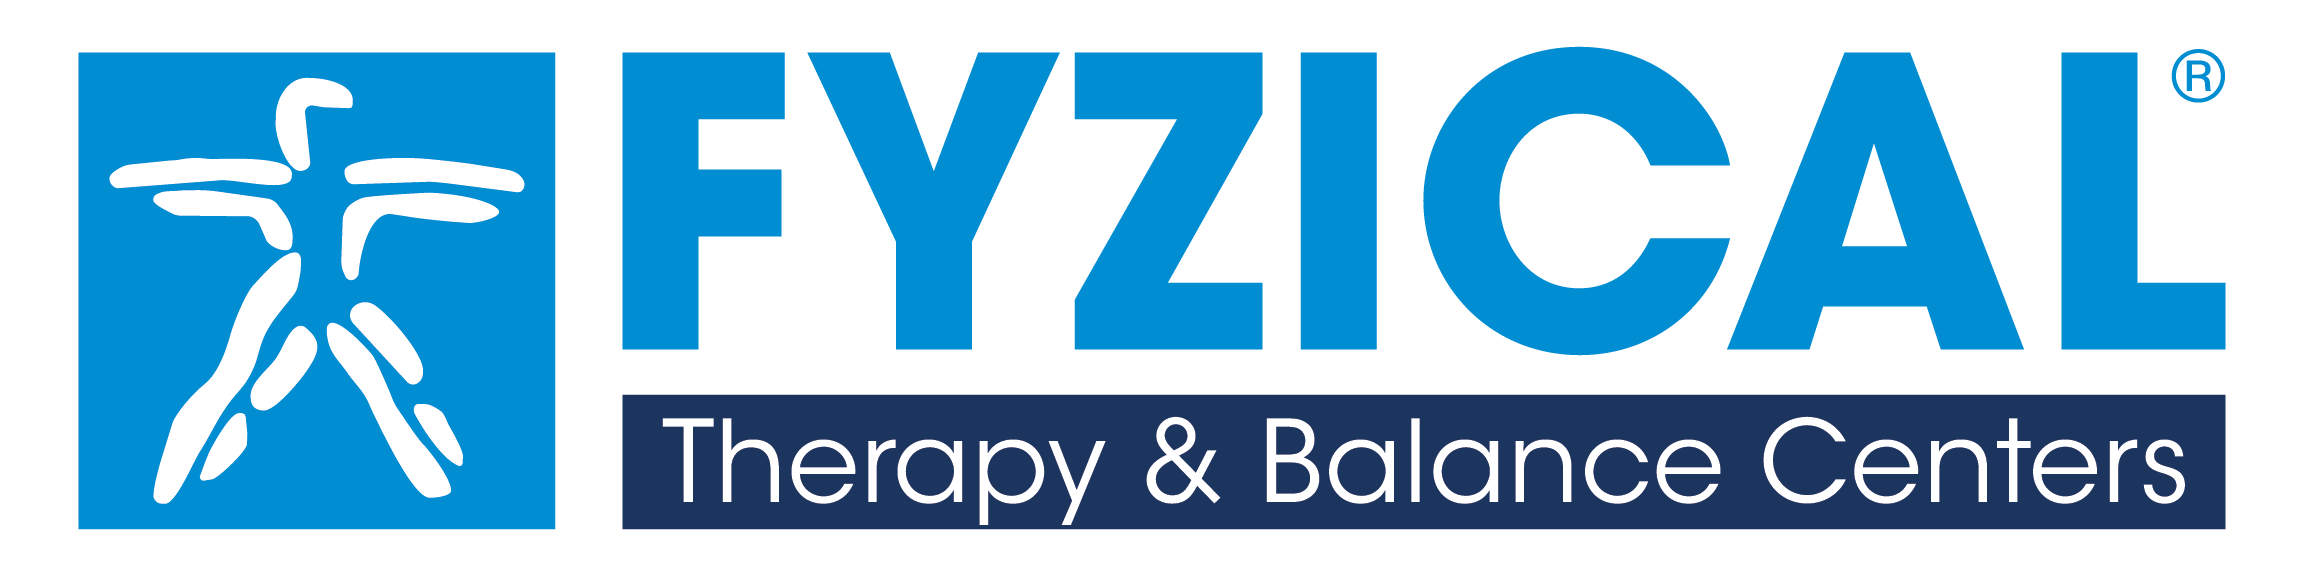 Fyzical Therapy & Balance Centers Logo